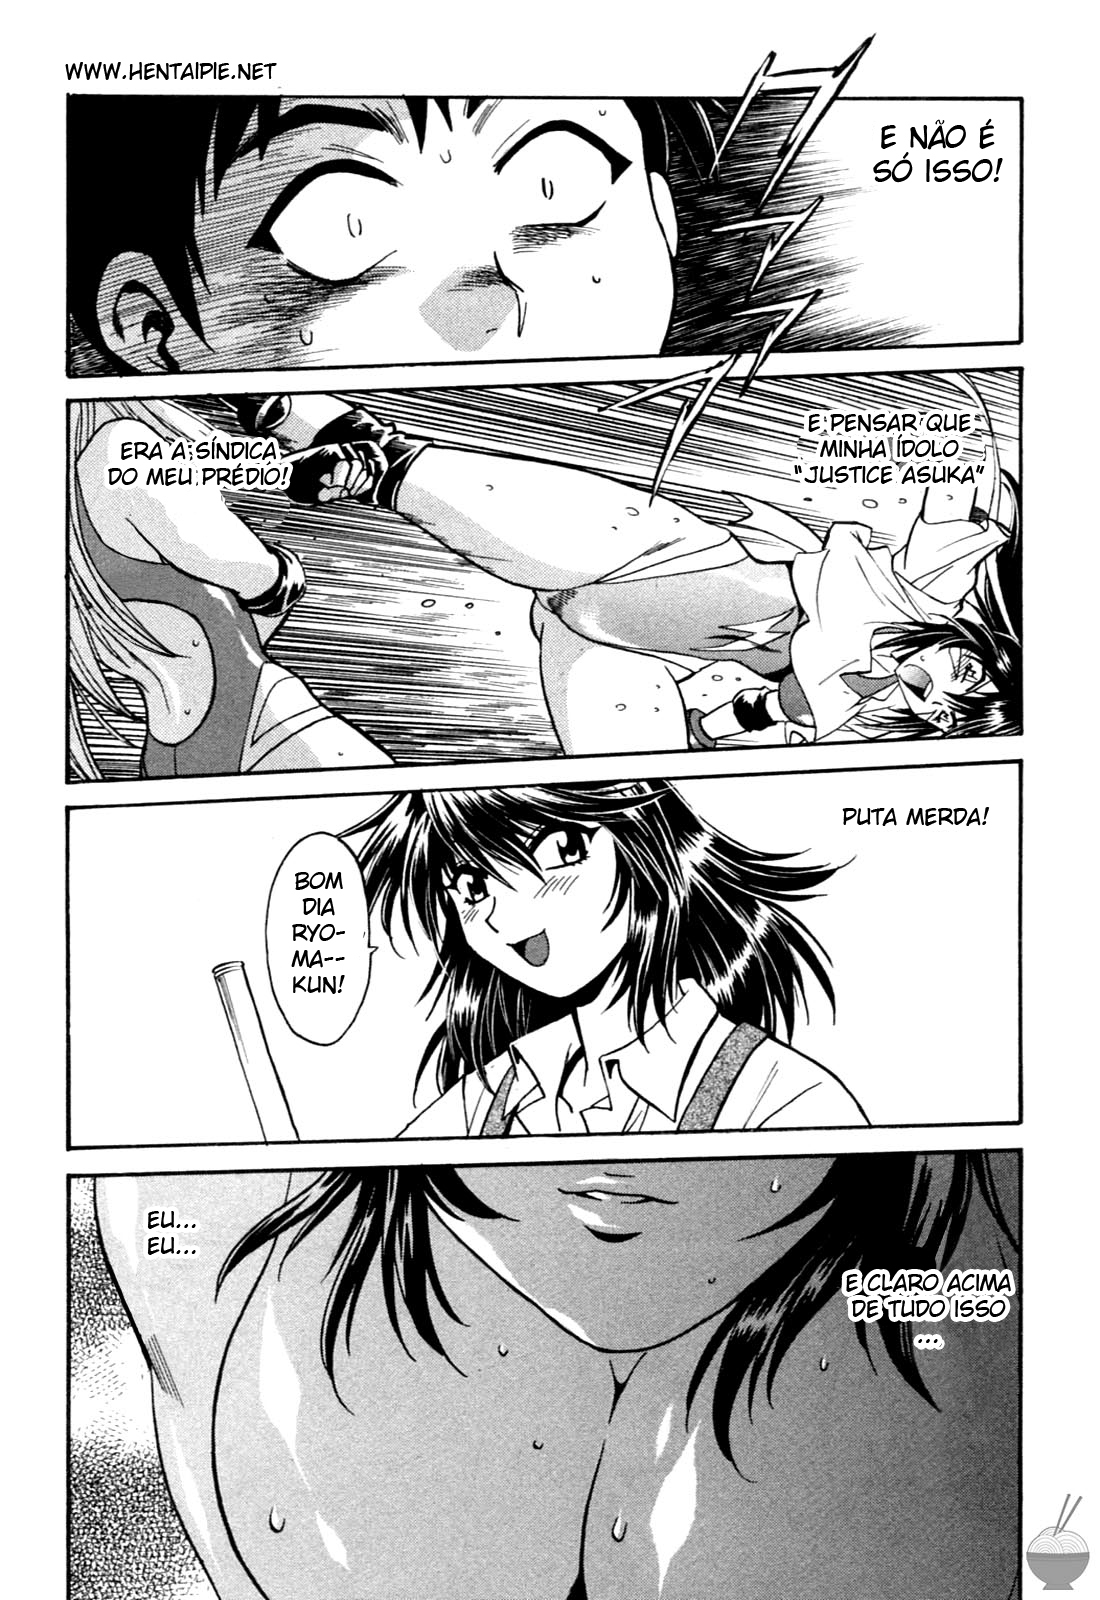 [Manabe Jouji] Ring x Mama 1 [Portuguese-BR] [HentaiPie] page 35 full